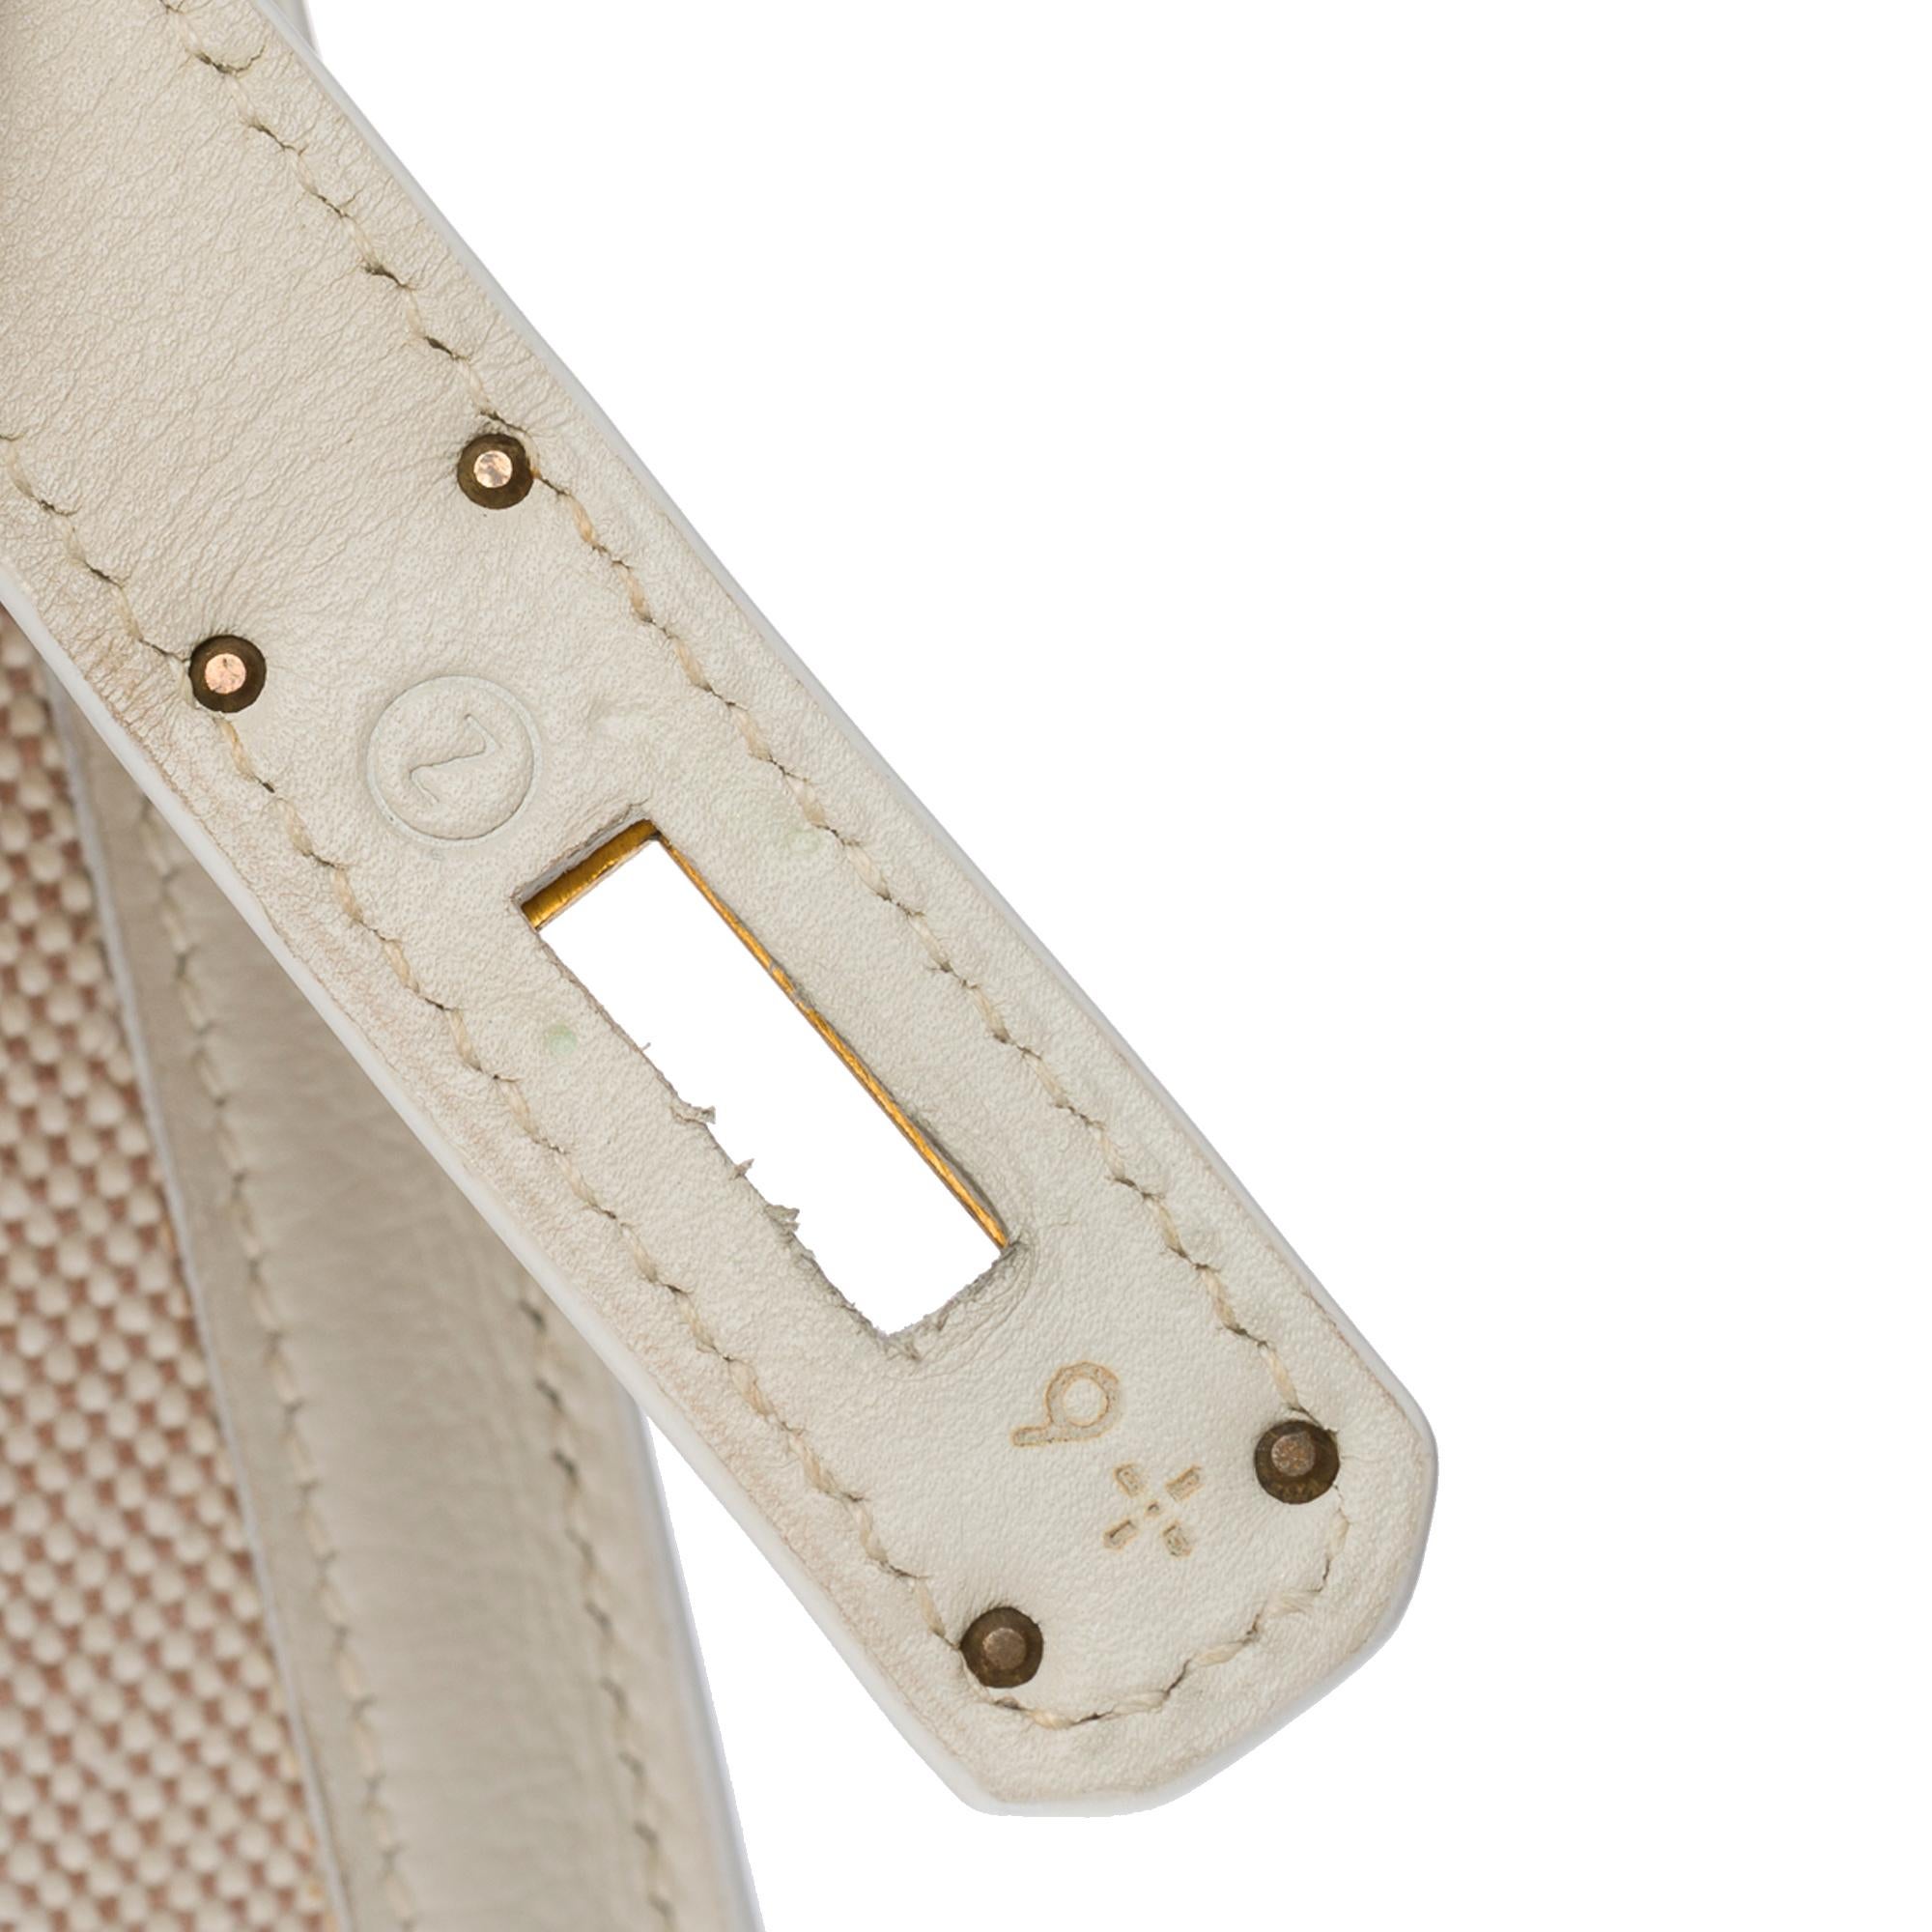 Hermès Kelly 28 sellier handbag strap in White canvas and Beige leather, GHW For Sale 2